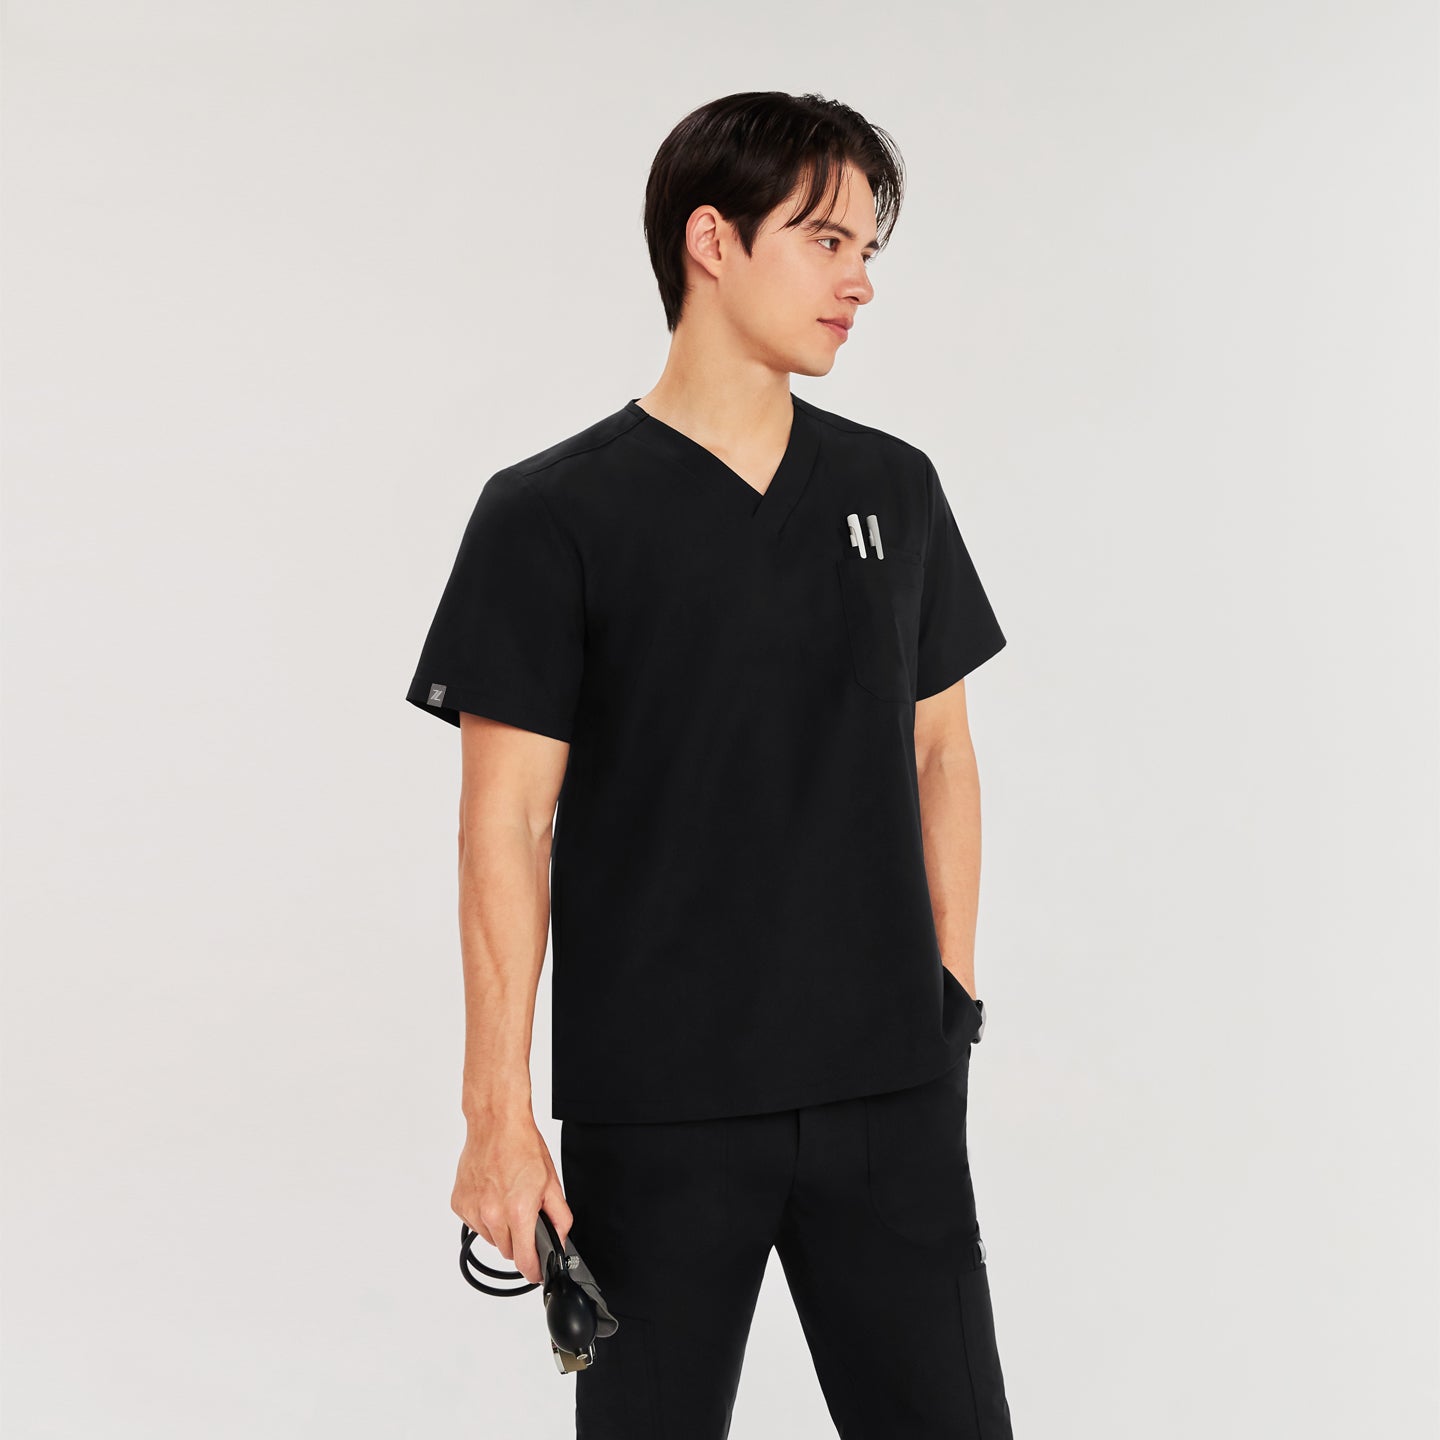 Man in black Zenir scrub top with chest pocket holding pens, standing with  sphygmomanometer in hand, looking to the side,Black